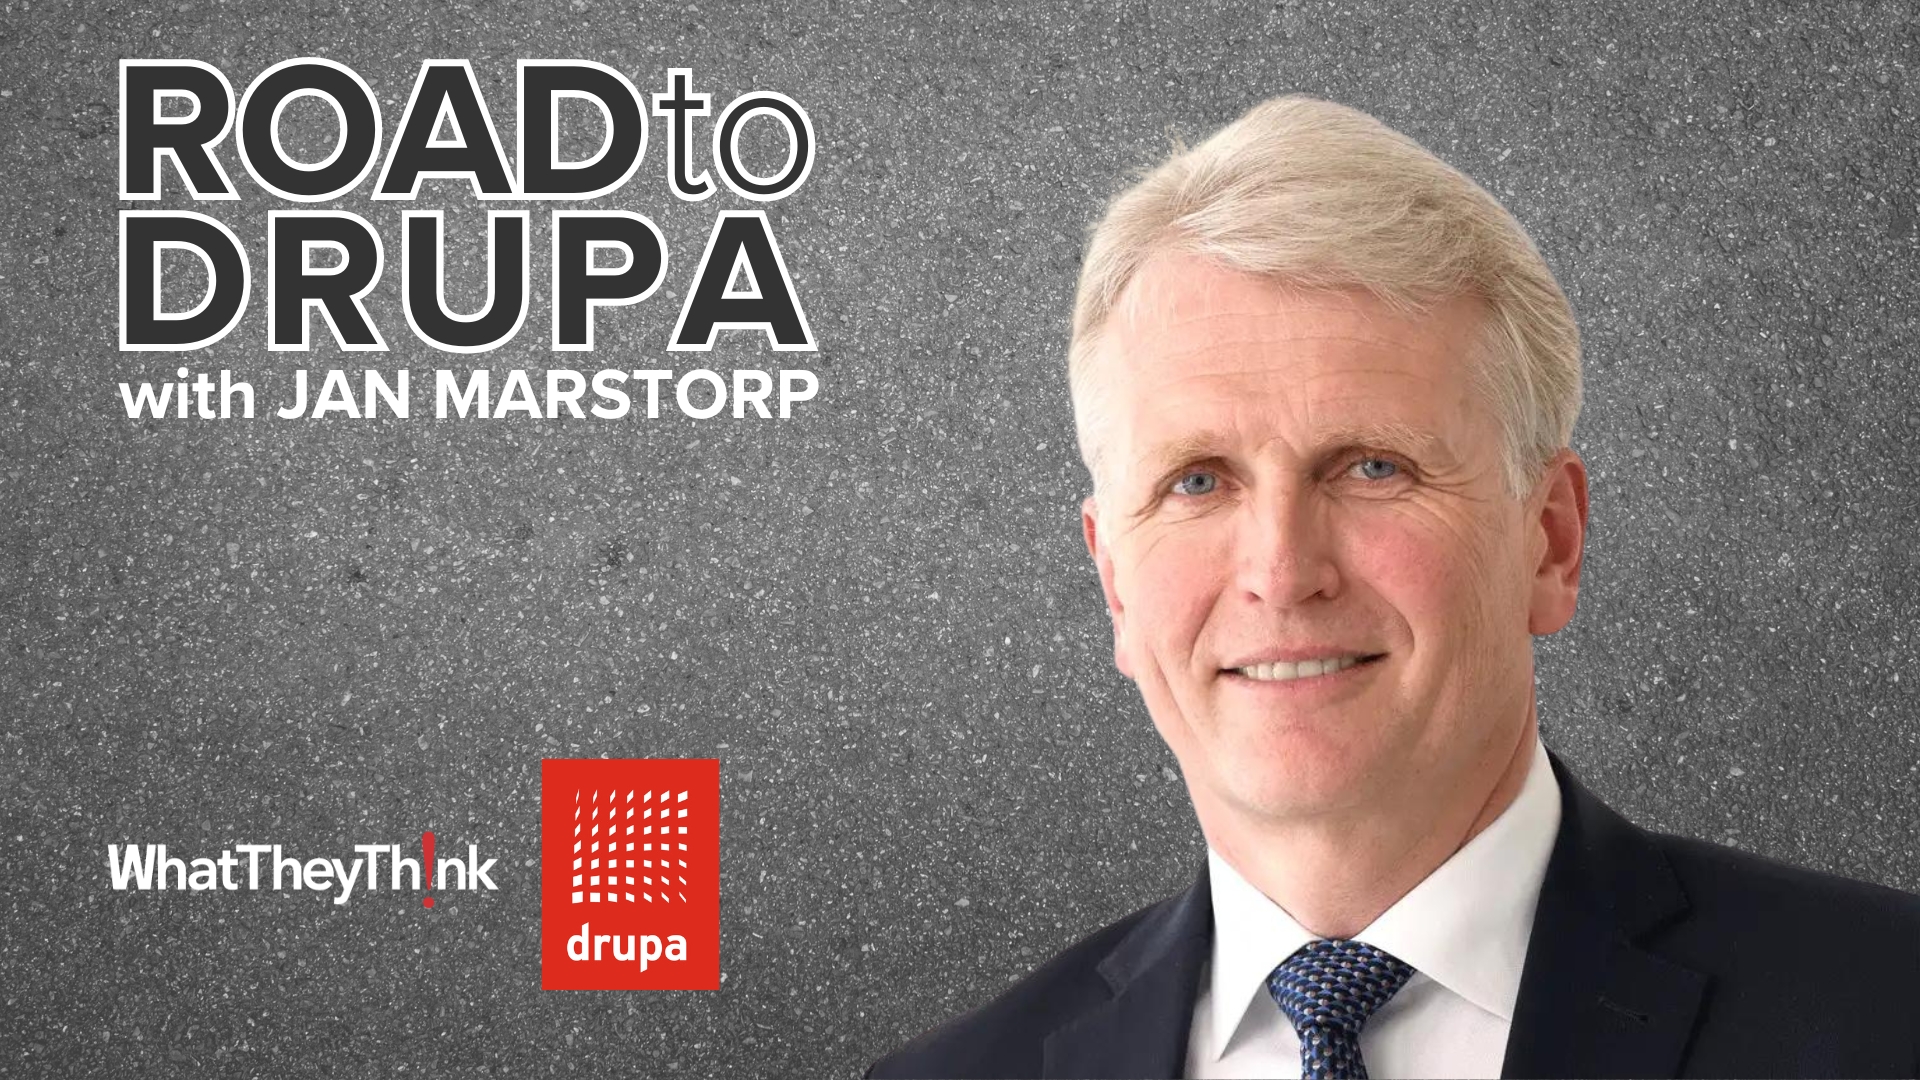 Road to drupa: Plockmatic Group’s Jan Marstorp